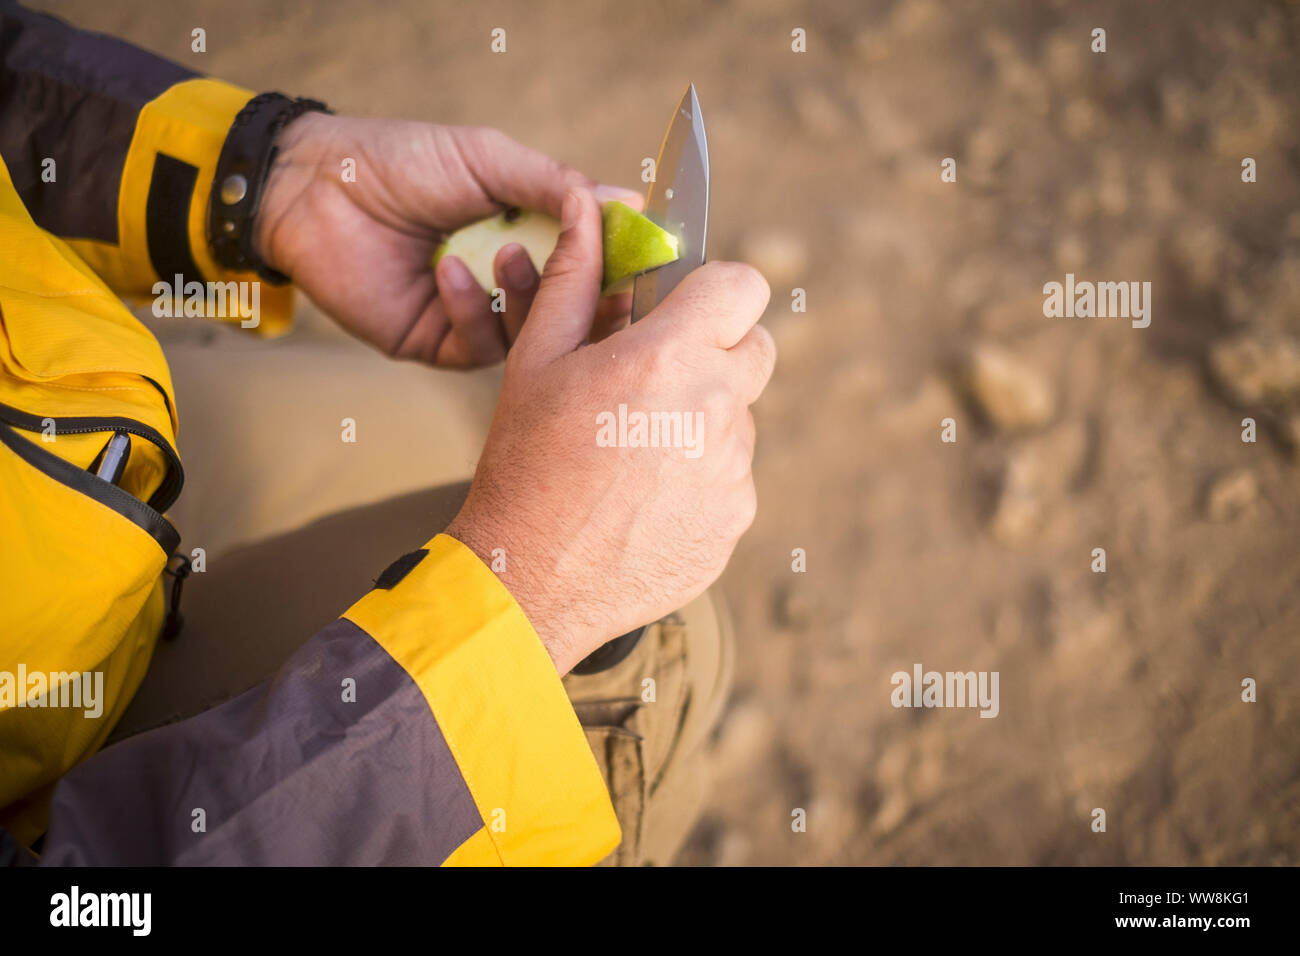 close up of human hands cutting a green apple with a knife outdoor during an adventure trekking outdoor in the desert. exploring the world and get an alternative travel and vacation concept Stock Photo